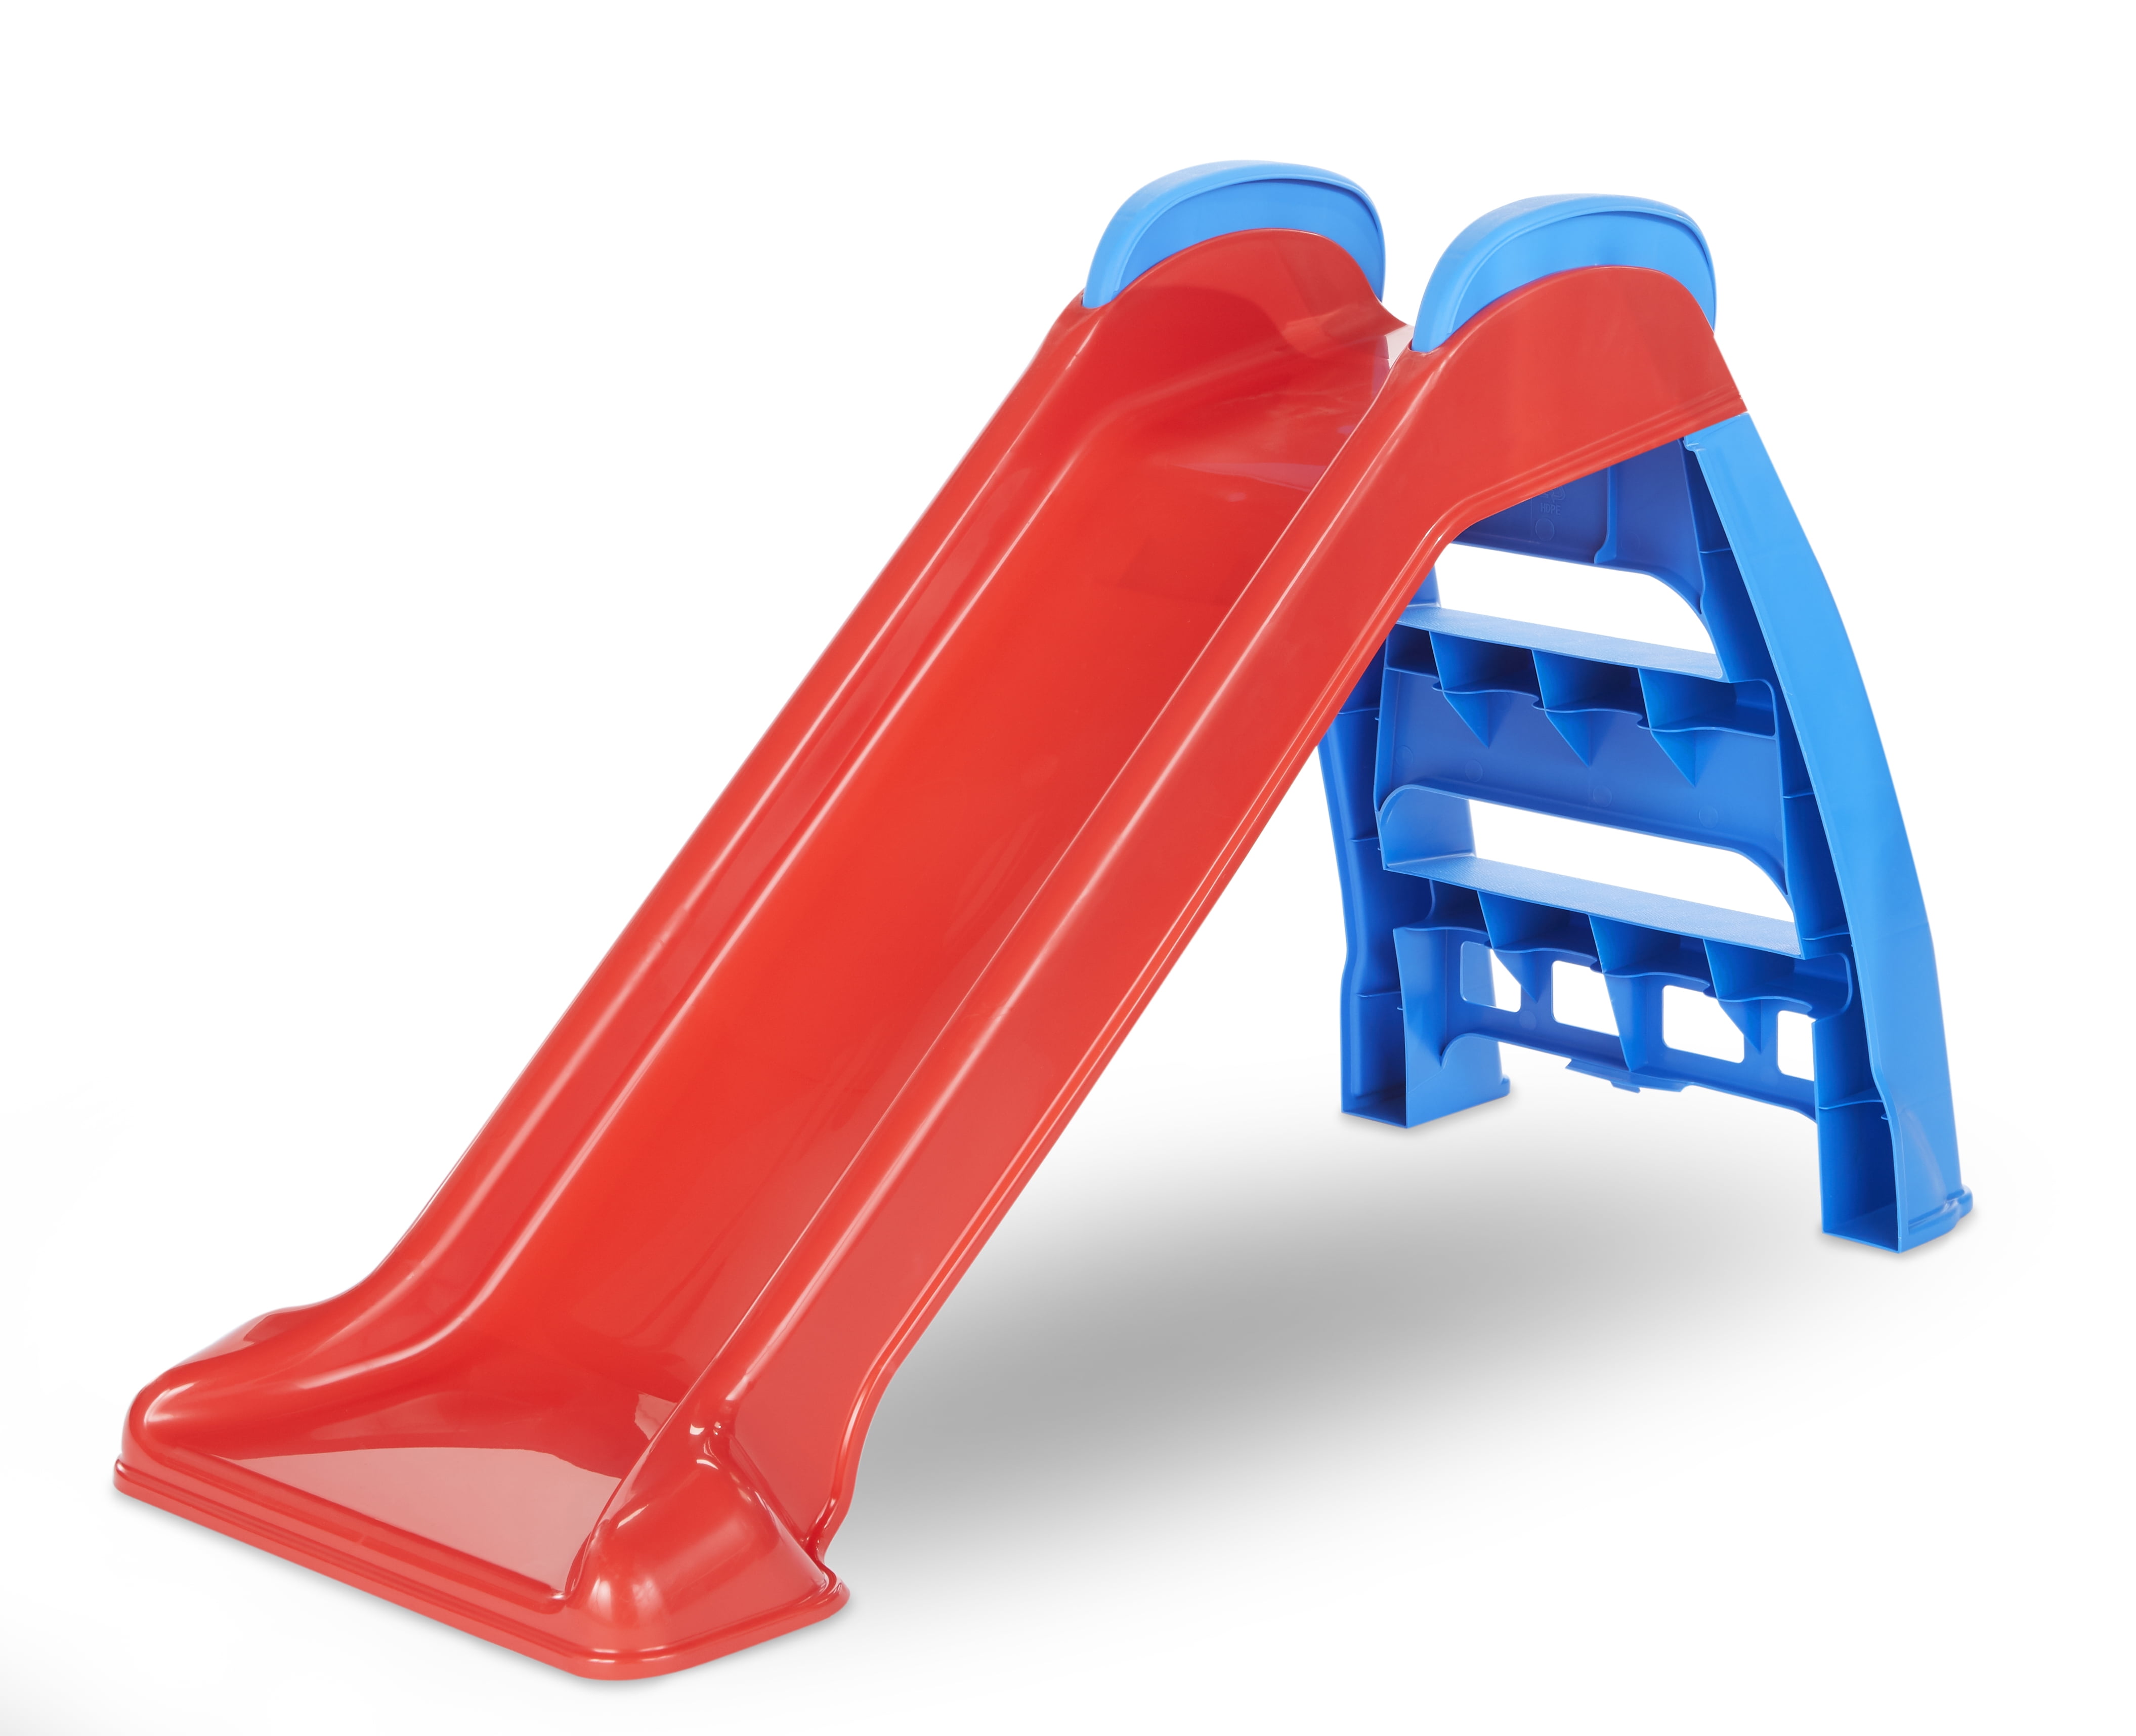 Little Tikes First Slide for Kids, Easy Set Up for Indoor Outdoor, Easy to Store, for Toddlers Ages 18 Months - 6 years